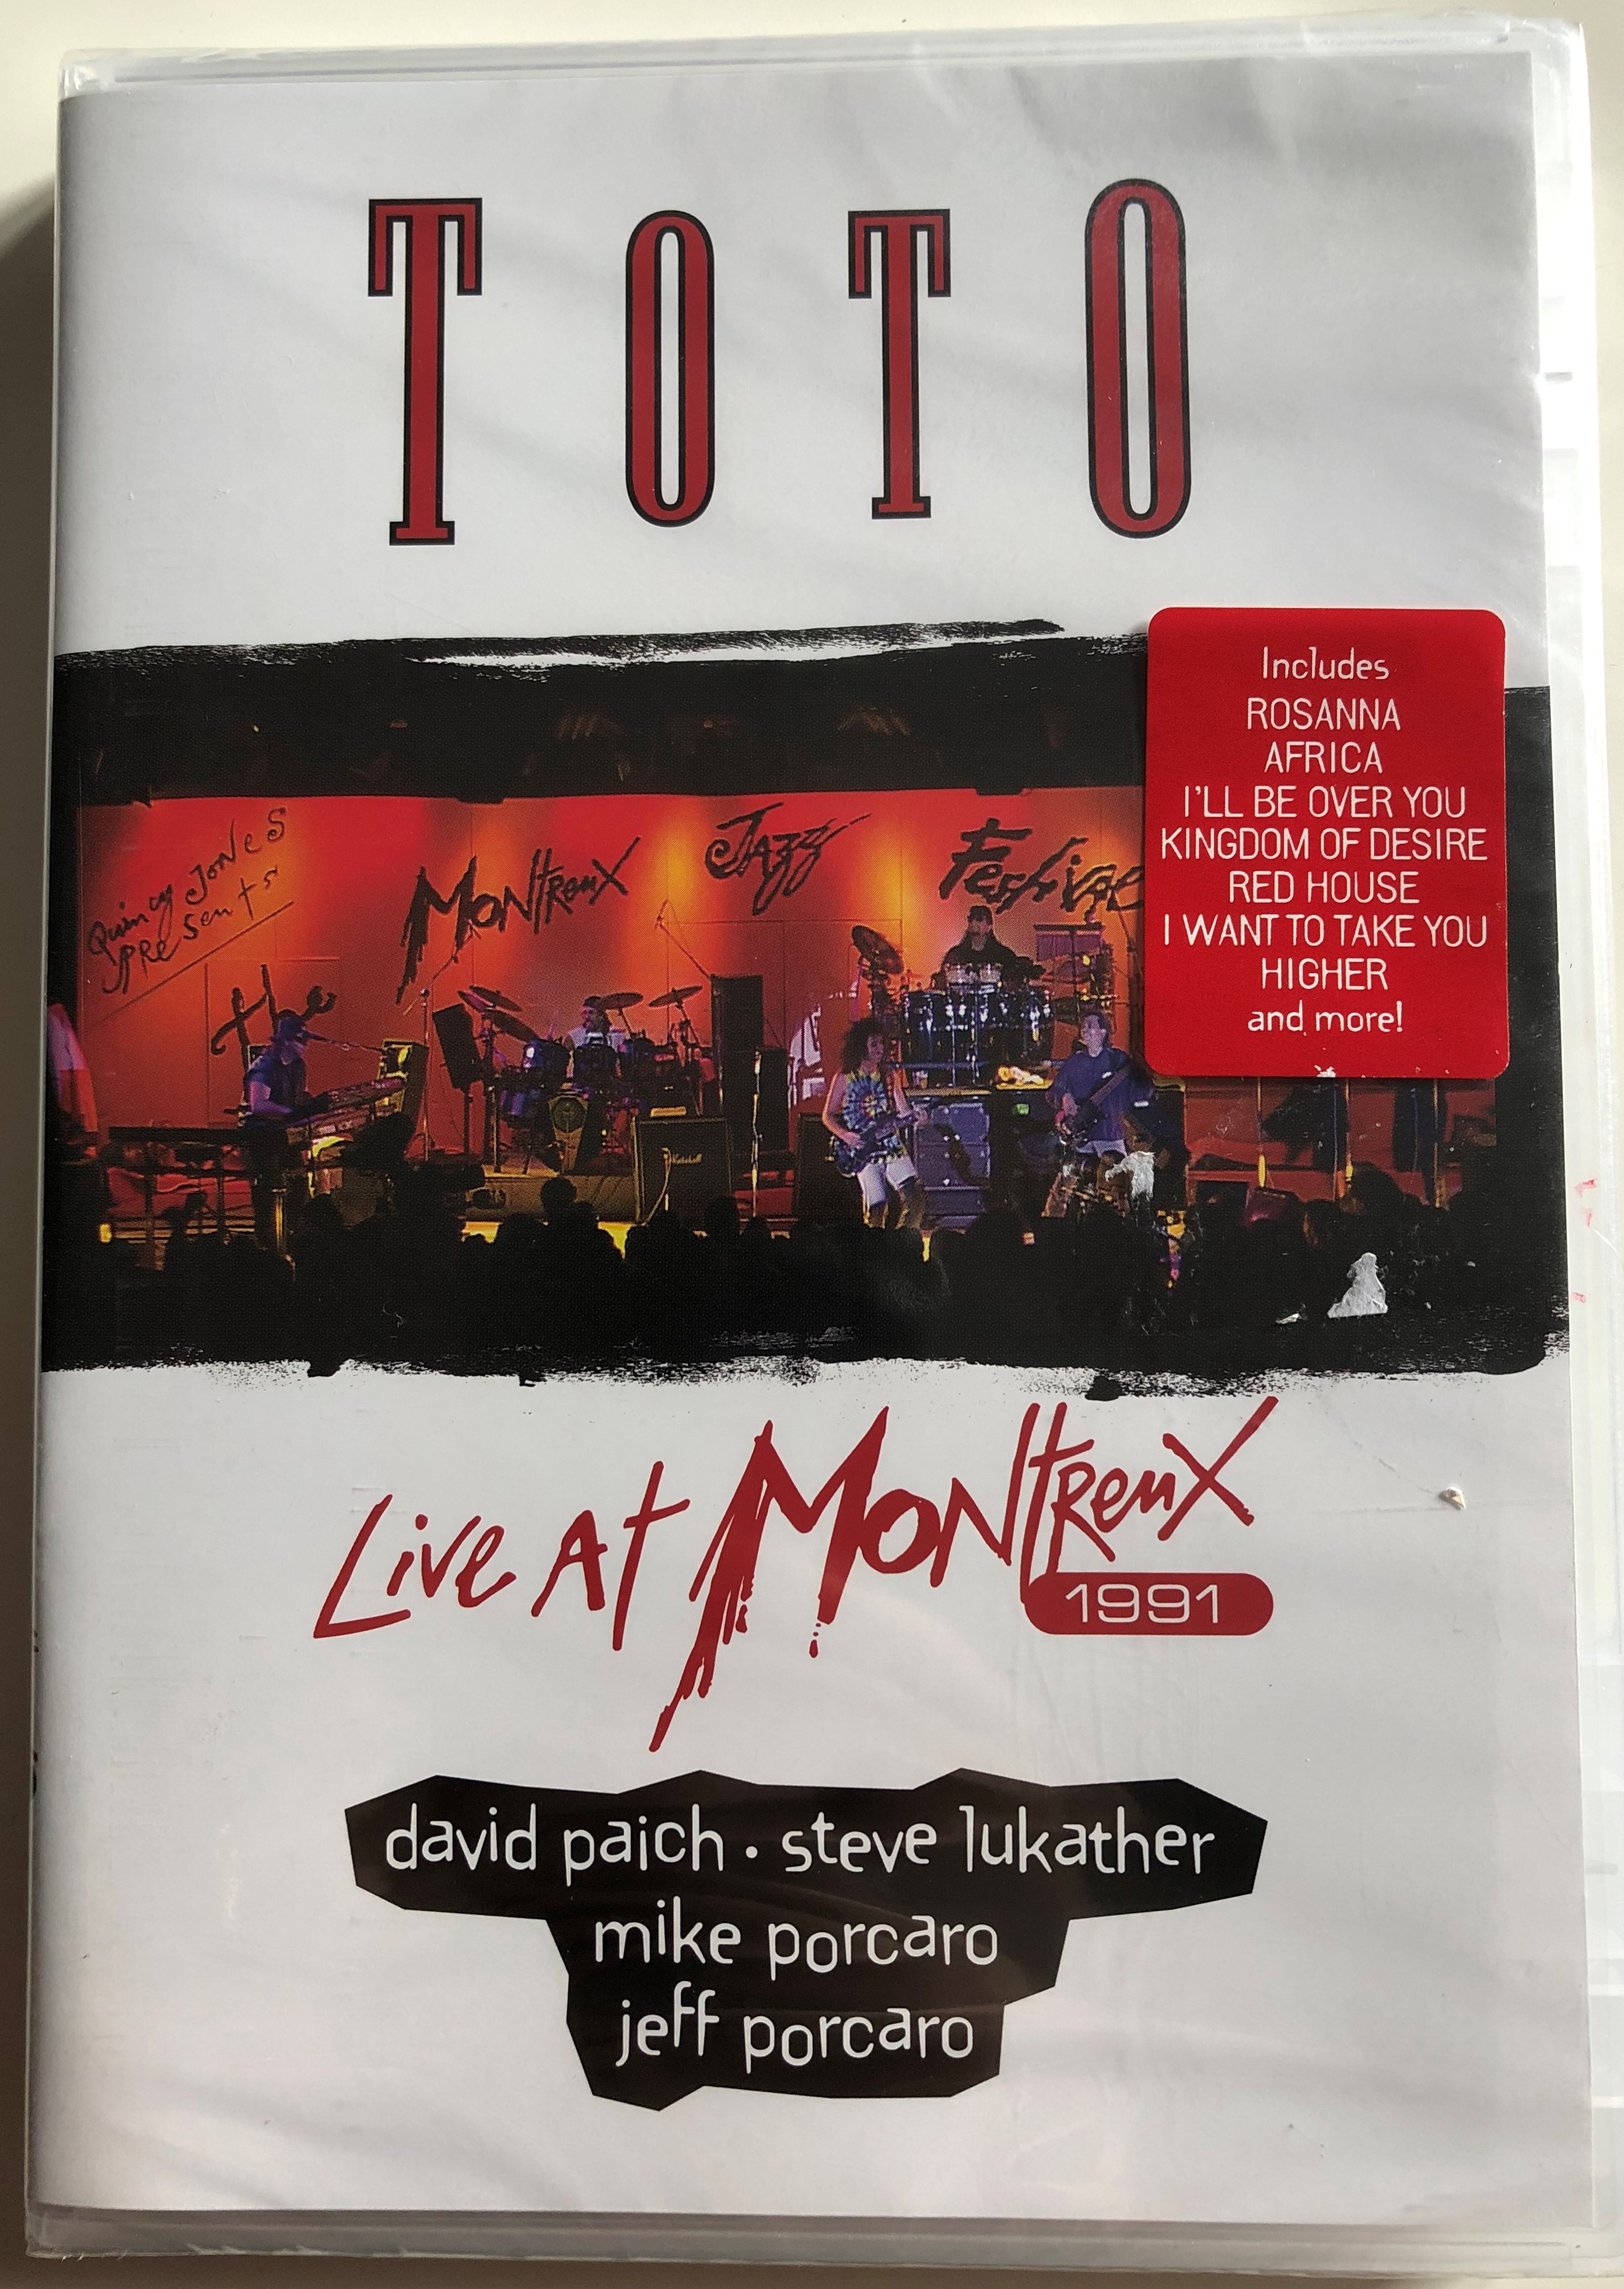 Toto - Live at Montreux DVD 1991  1.JPG